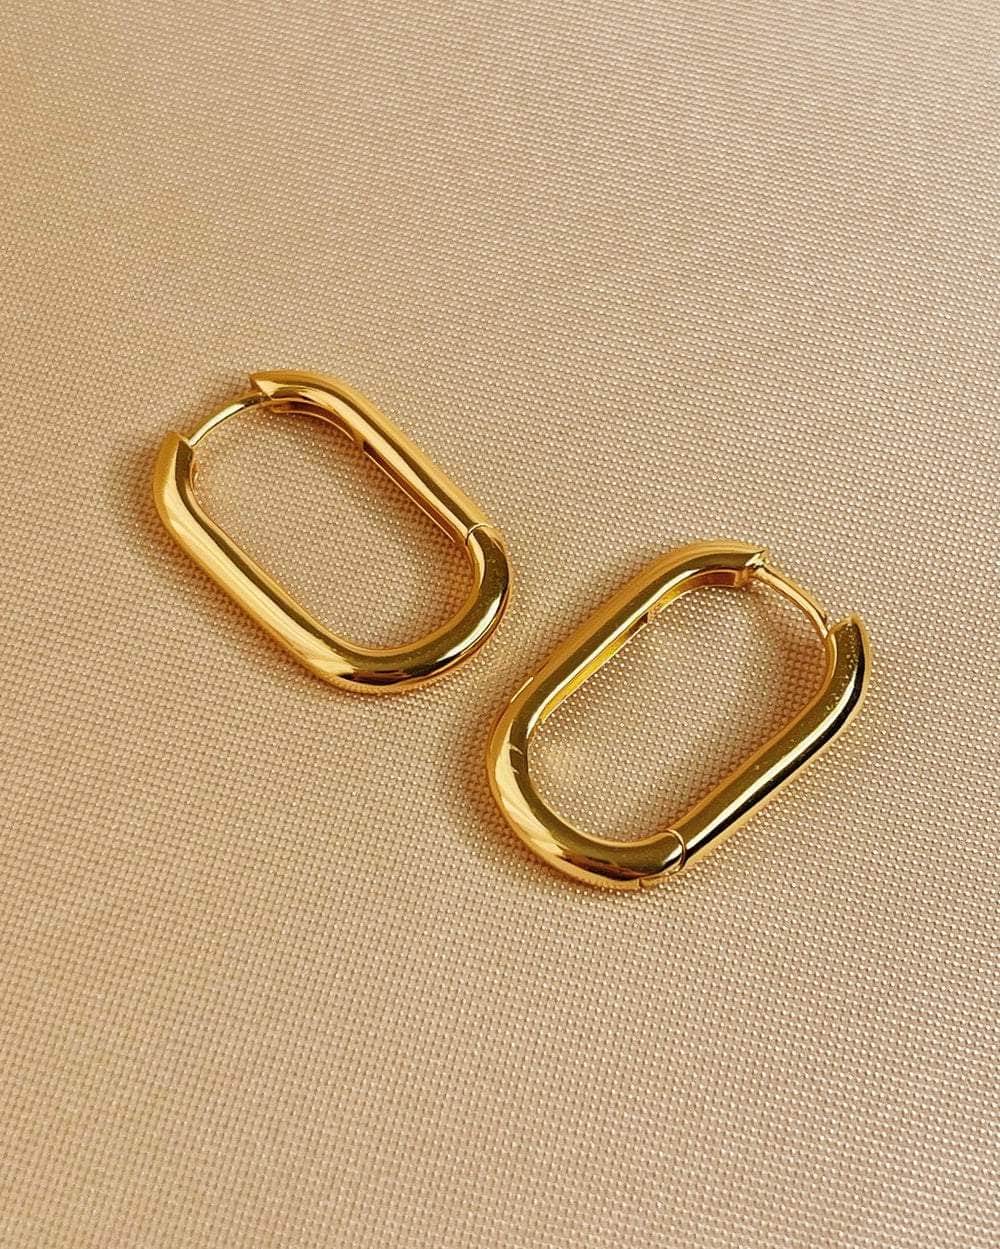 So Dainty Co. Huggies / Hoops Khloe Gold Hoops Gold Plated 925 Sterling Silver Jewelry